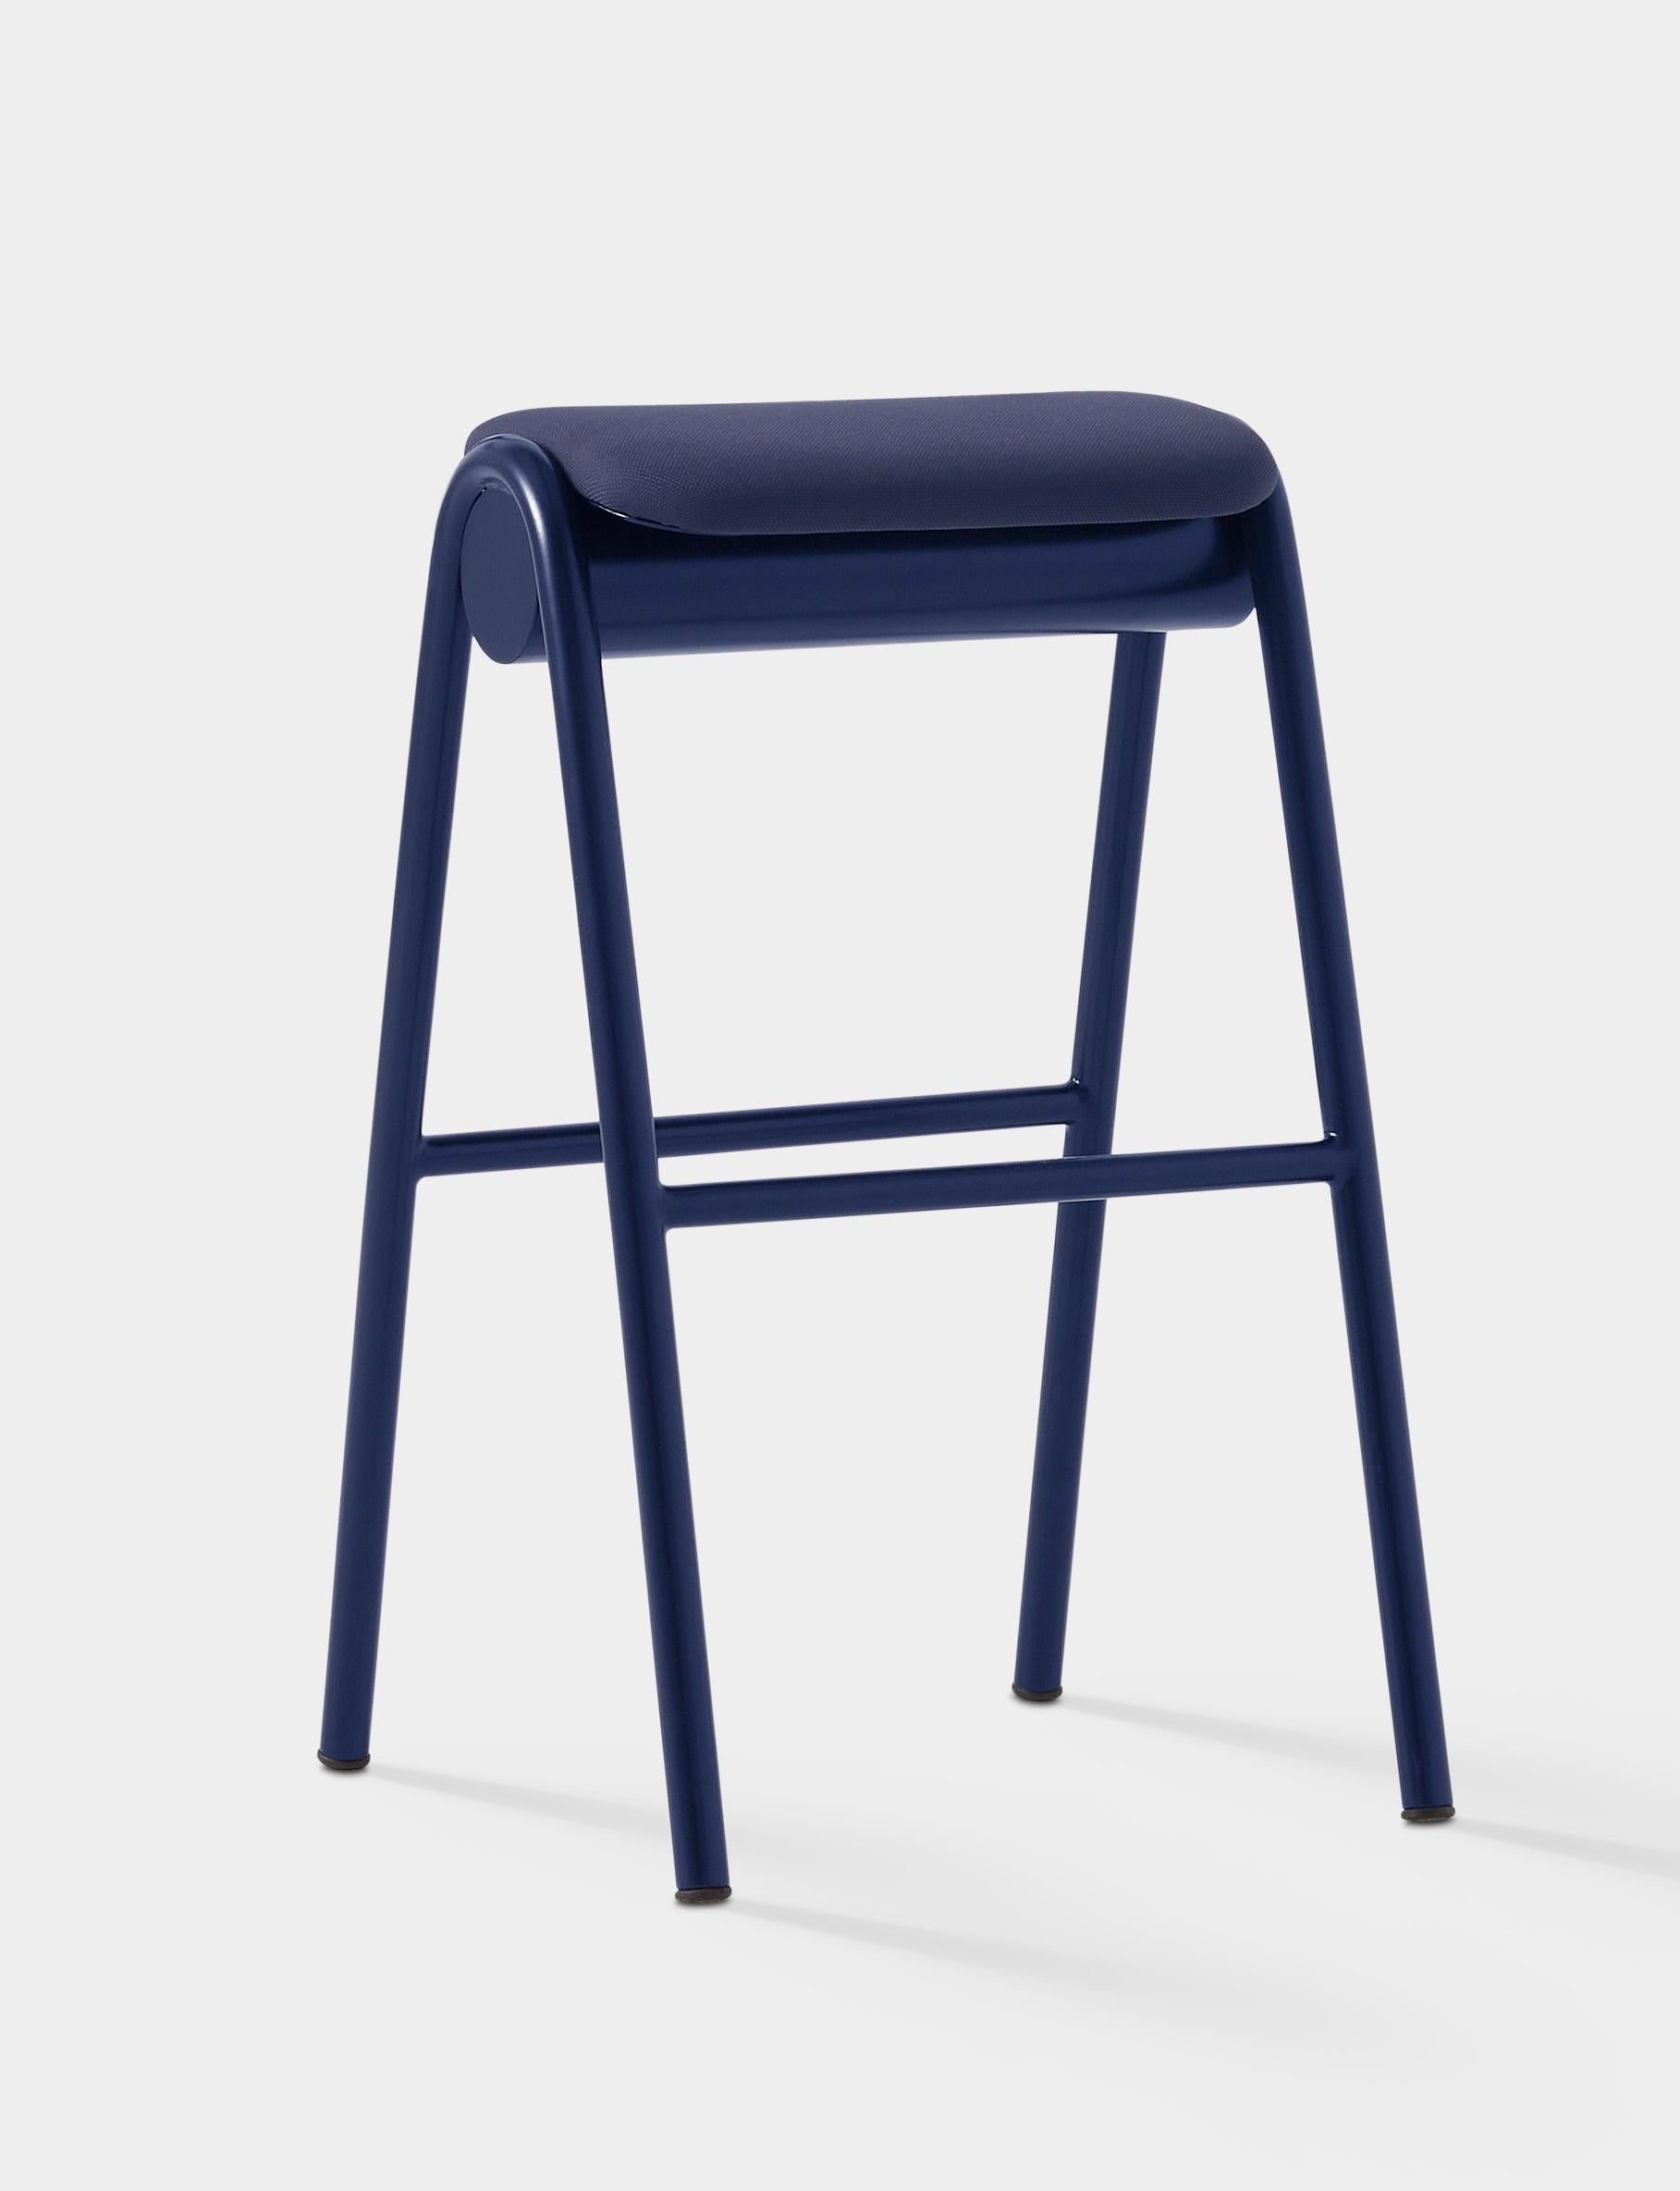 ZUM High Bar Stool by Pepe Albargues
Designed By Carlos Jiménez. 
Dimensions: D 48 x W 49 x D 79 cm.
Materials: Aluminum, foam, plywood and upholstery.

Curved plywood seat. Aluminum structure lacquered any RAL color. Foam CMHR (high resilience and